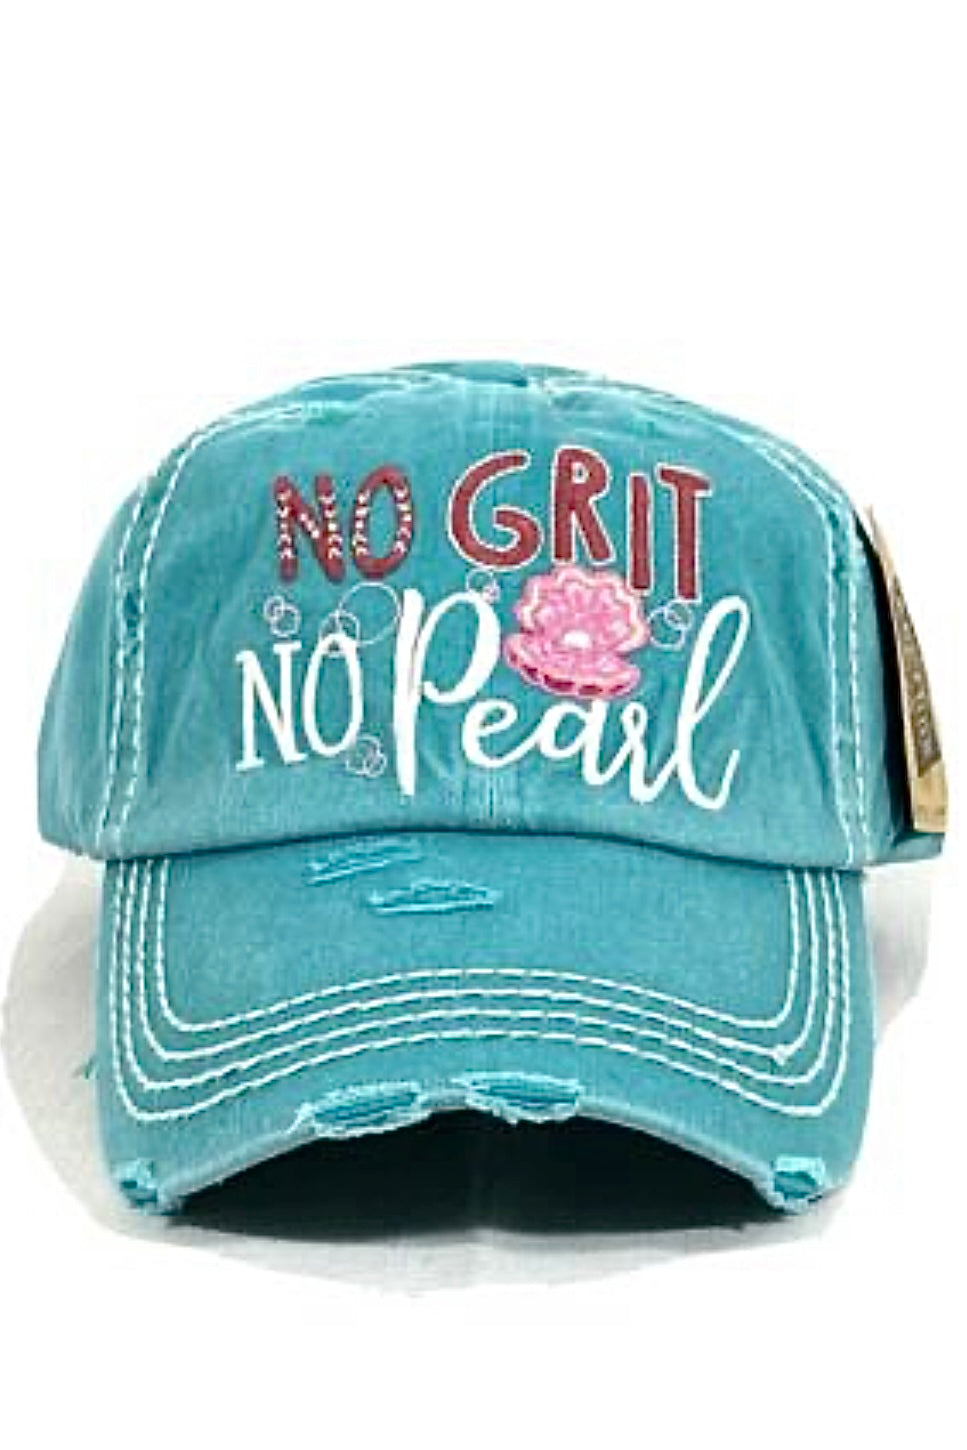 No Grit No Pearl Hat - Turquoise